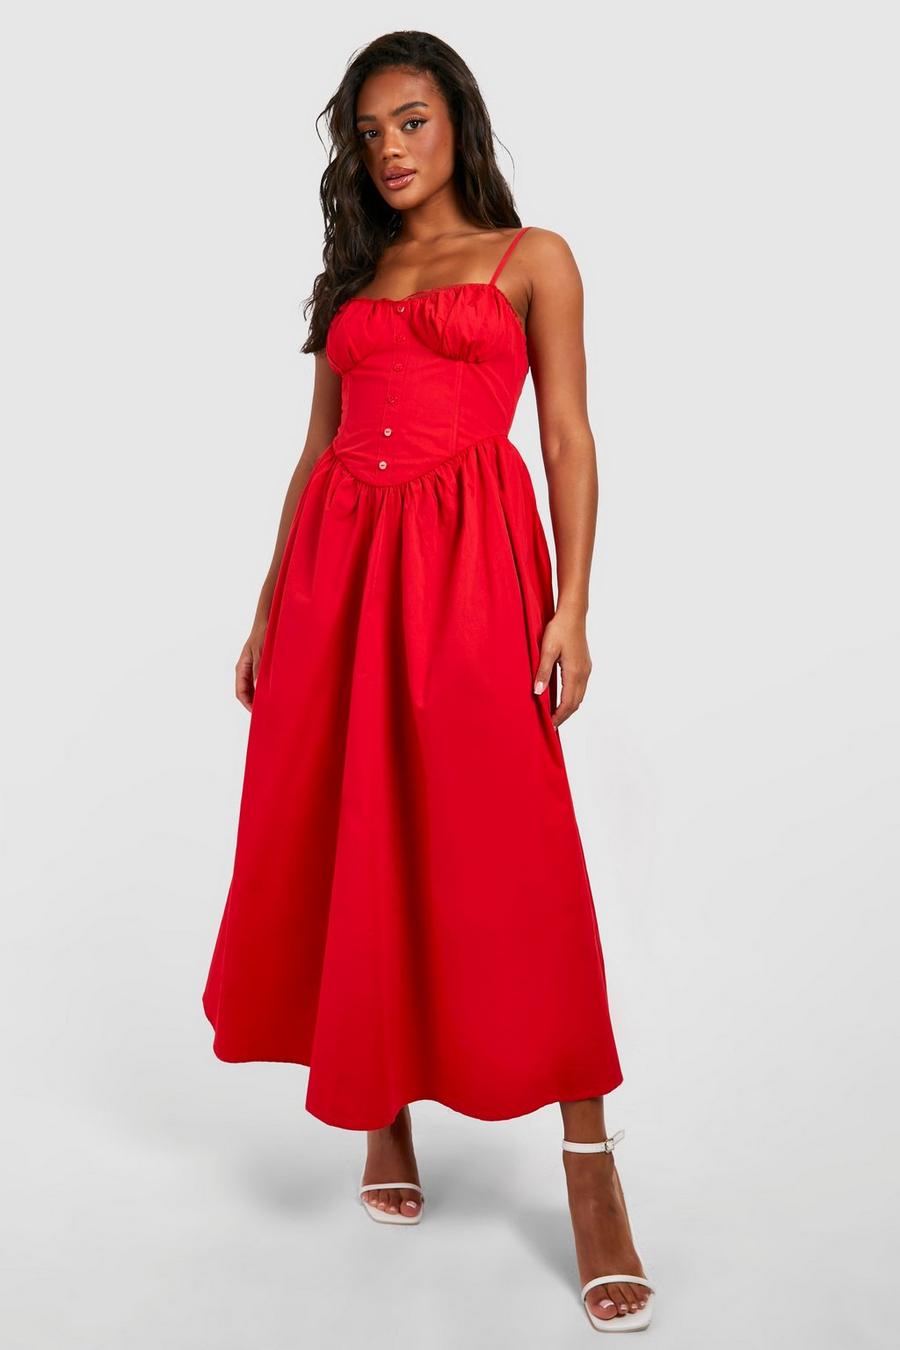 Eevi Premium Jersey Strapless Plunge Neck Ruched Top in Scarlet Red